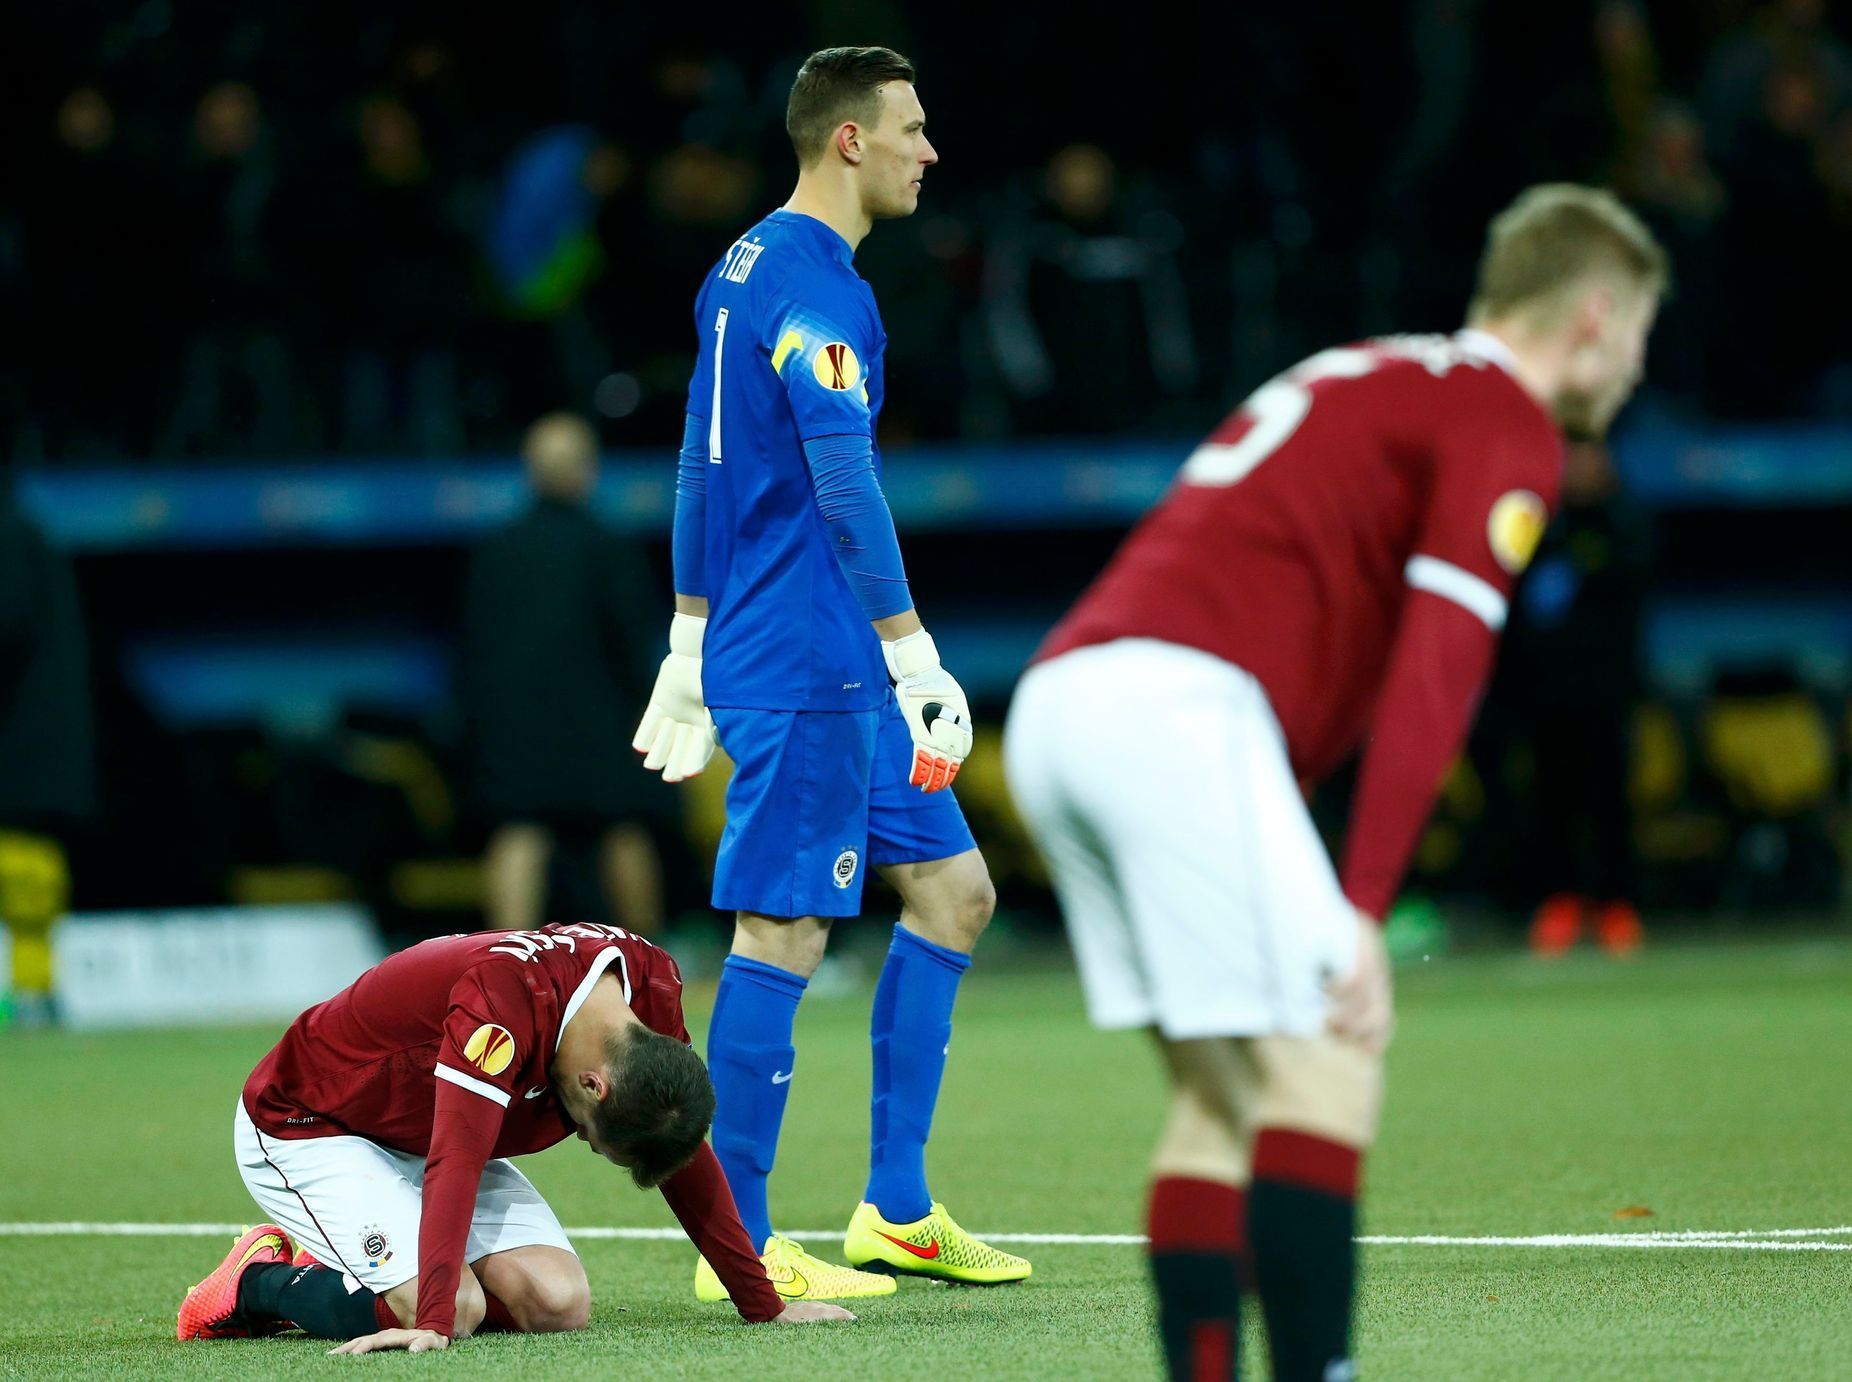 Sparta Prague players stand dejected after BSC Young Boys scored a second goal during Europa League match in Bern